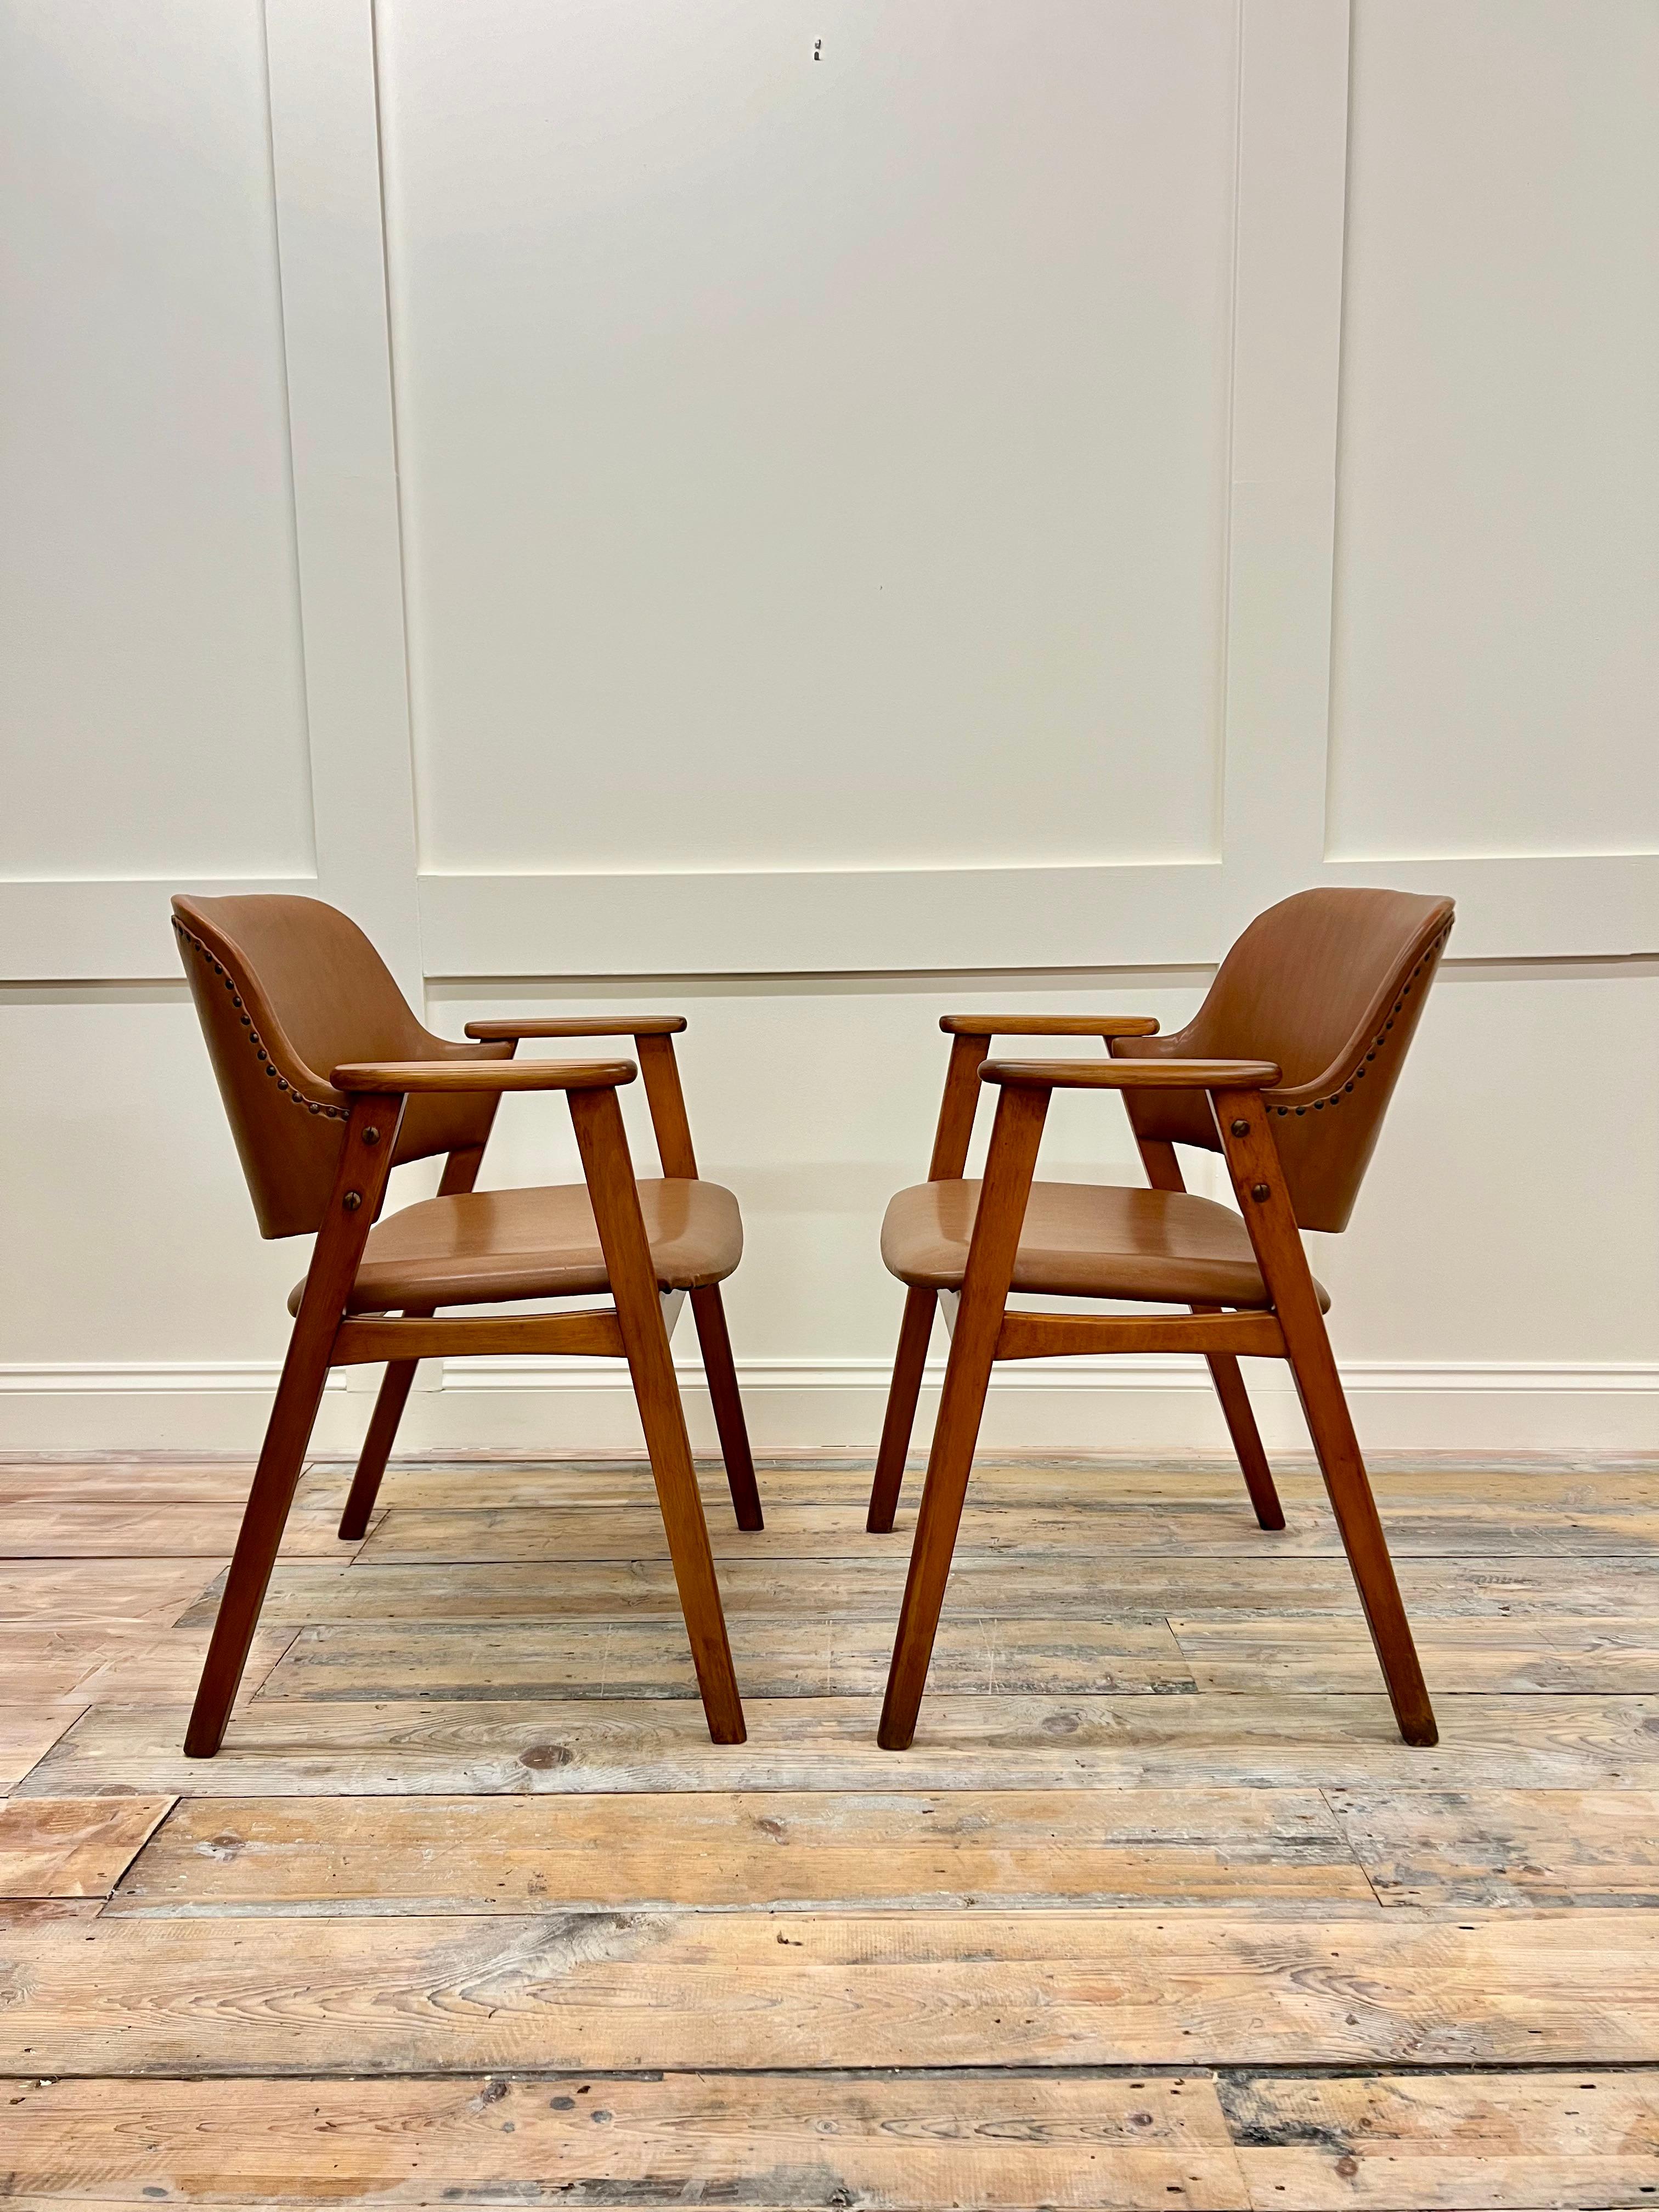 Dutch Set of 2 Midcentury Modern Dining Chairs by Cees Braakman for Pastoe, c.1950s